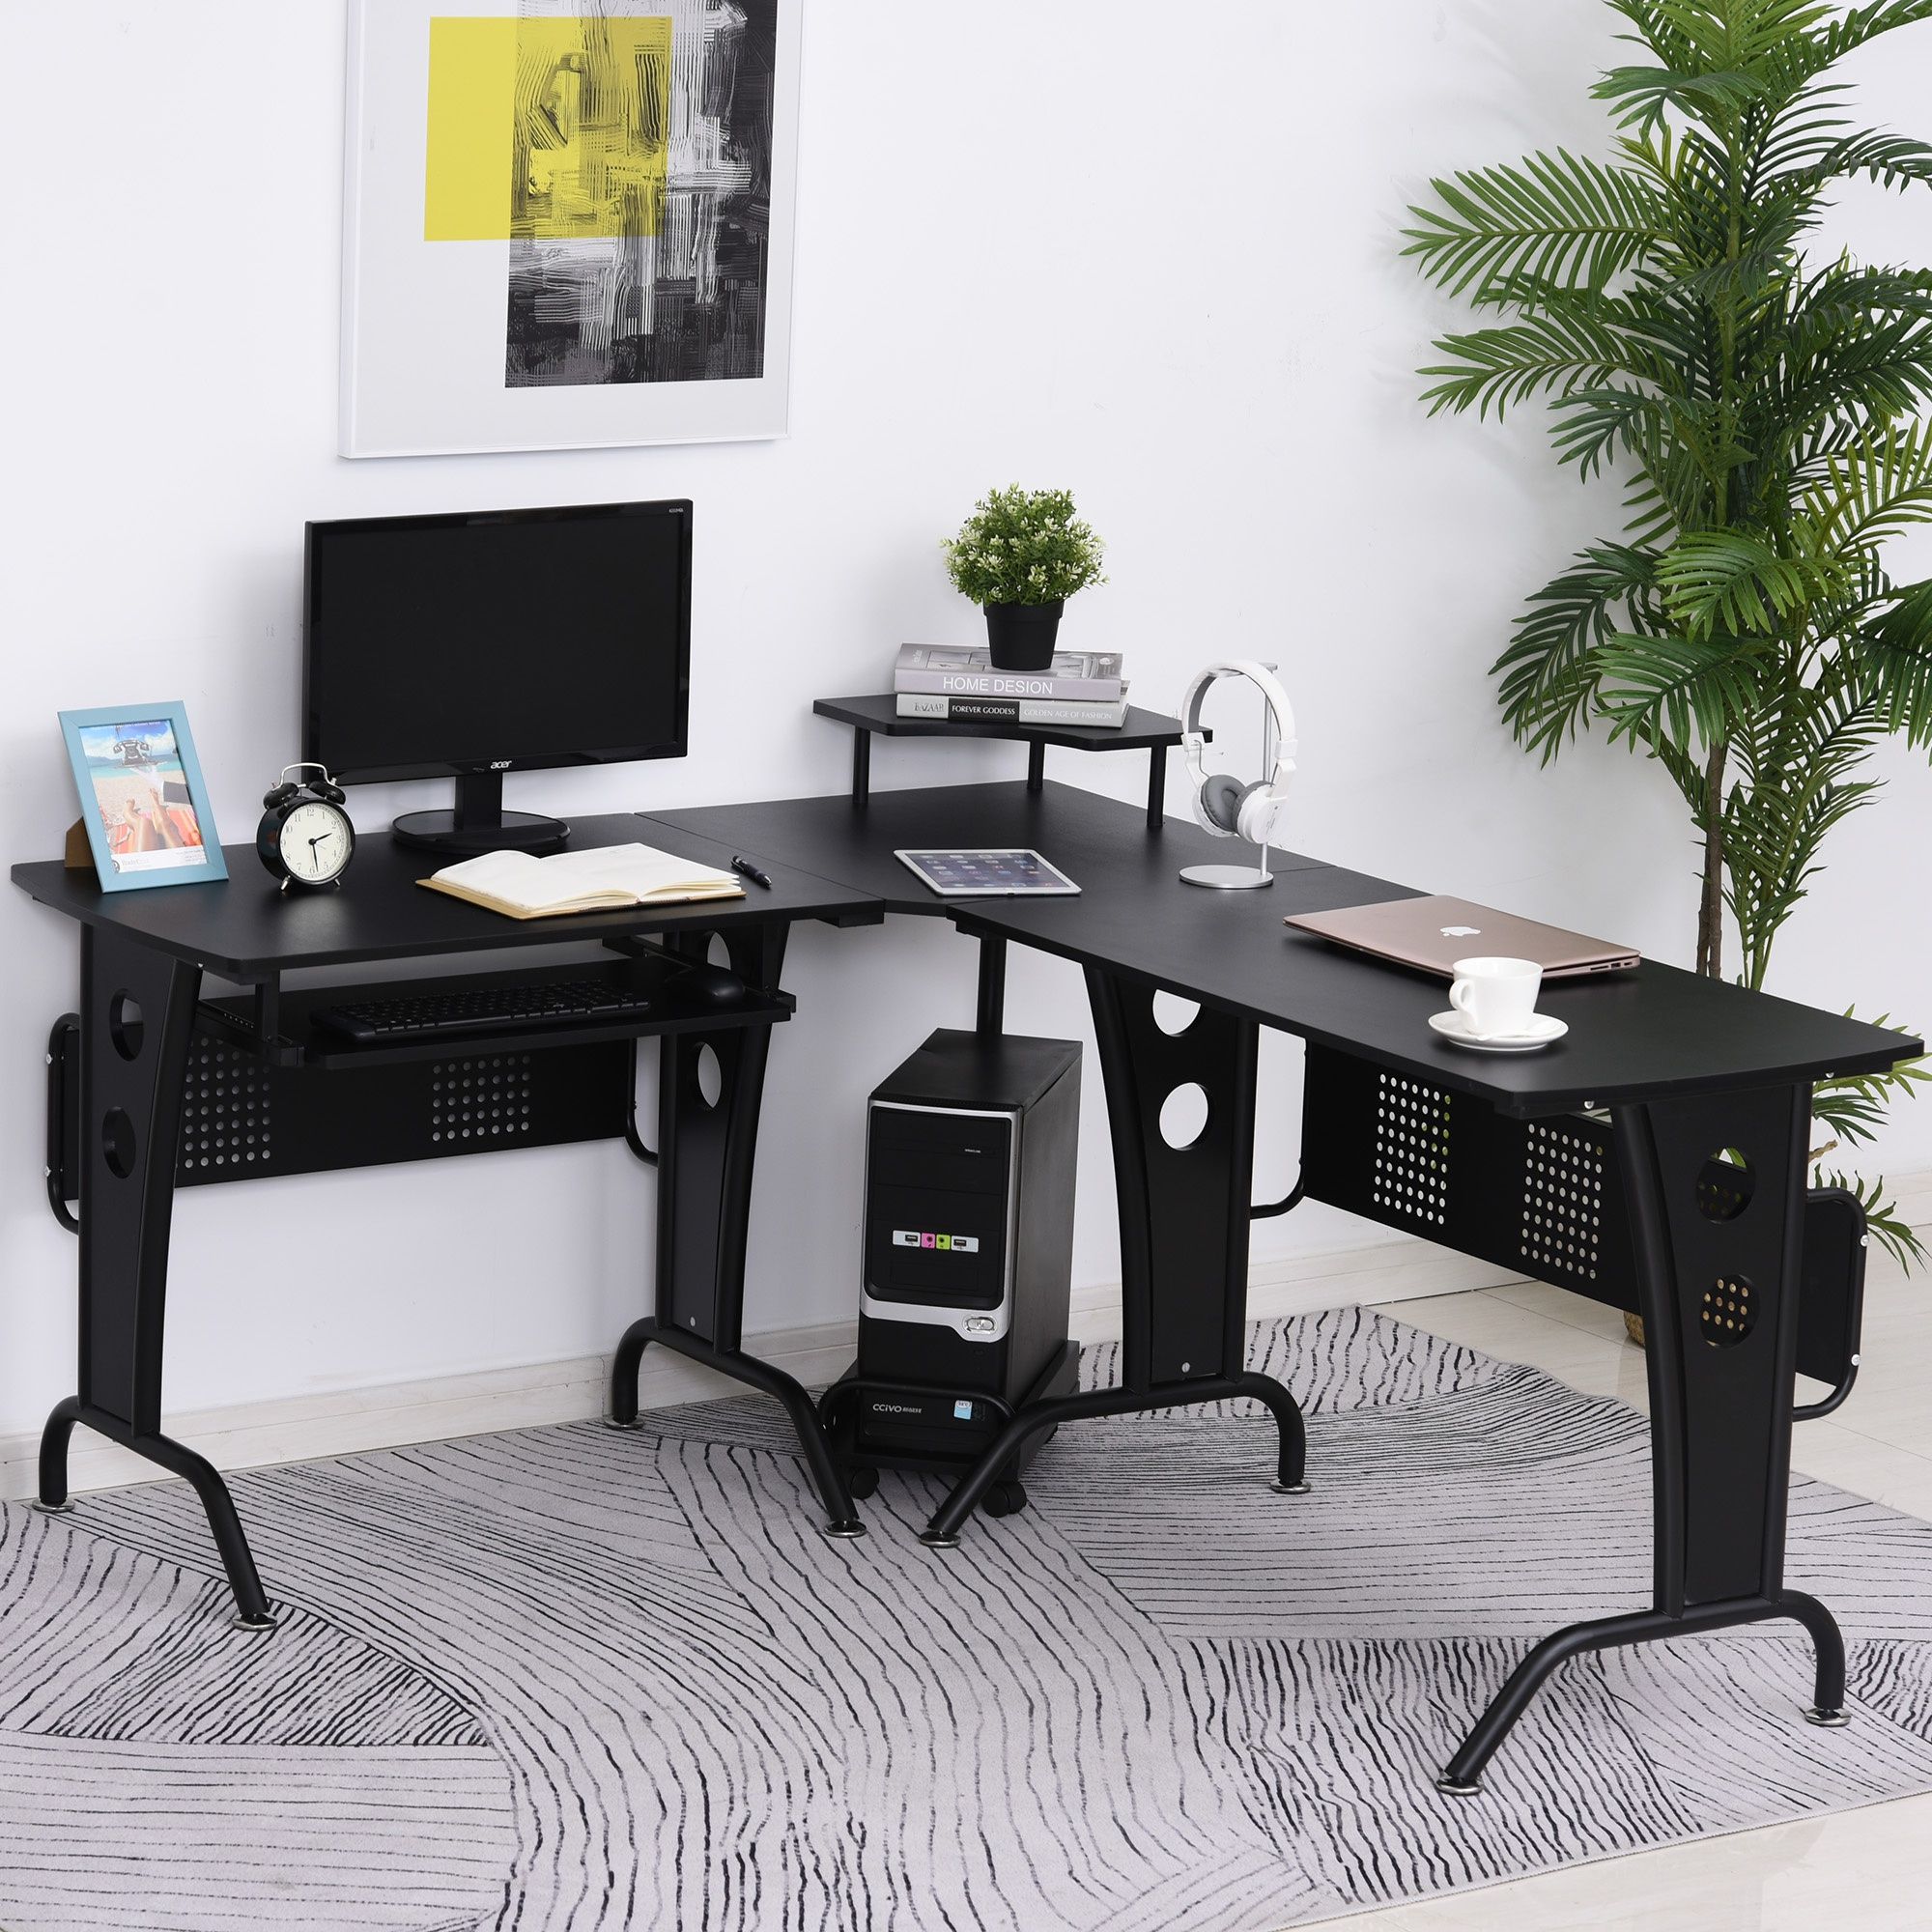 Homcom Steel Mdf Top L Shaped Corner Desk W/ Keyboard Tray Black Throughout Natural Wood And White Metal Office Desks (View 4 of 15)